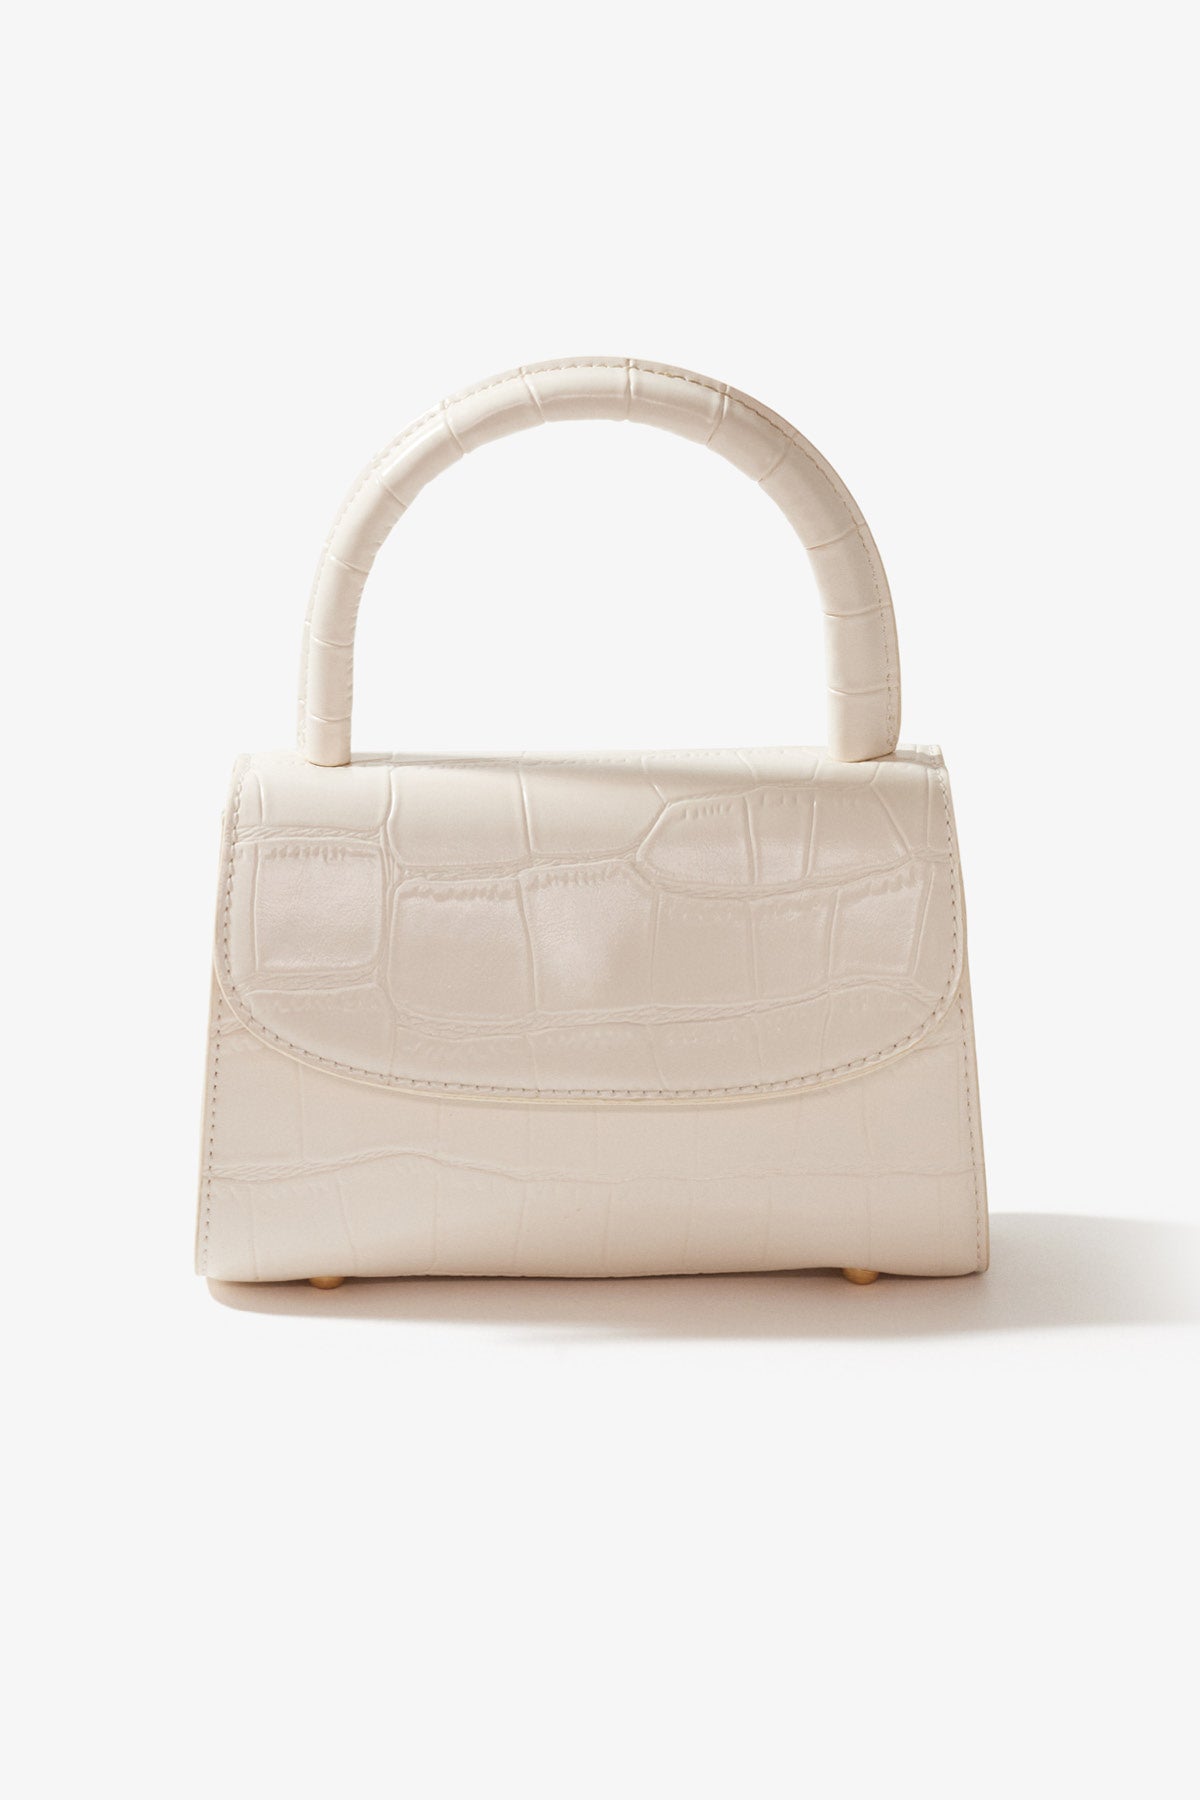 Marc Jacobs The Micro Tote Cotton Silver | Crossbody Bag